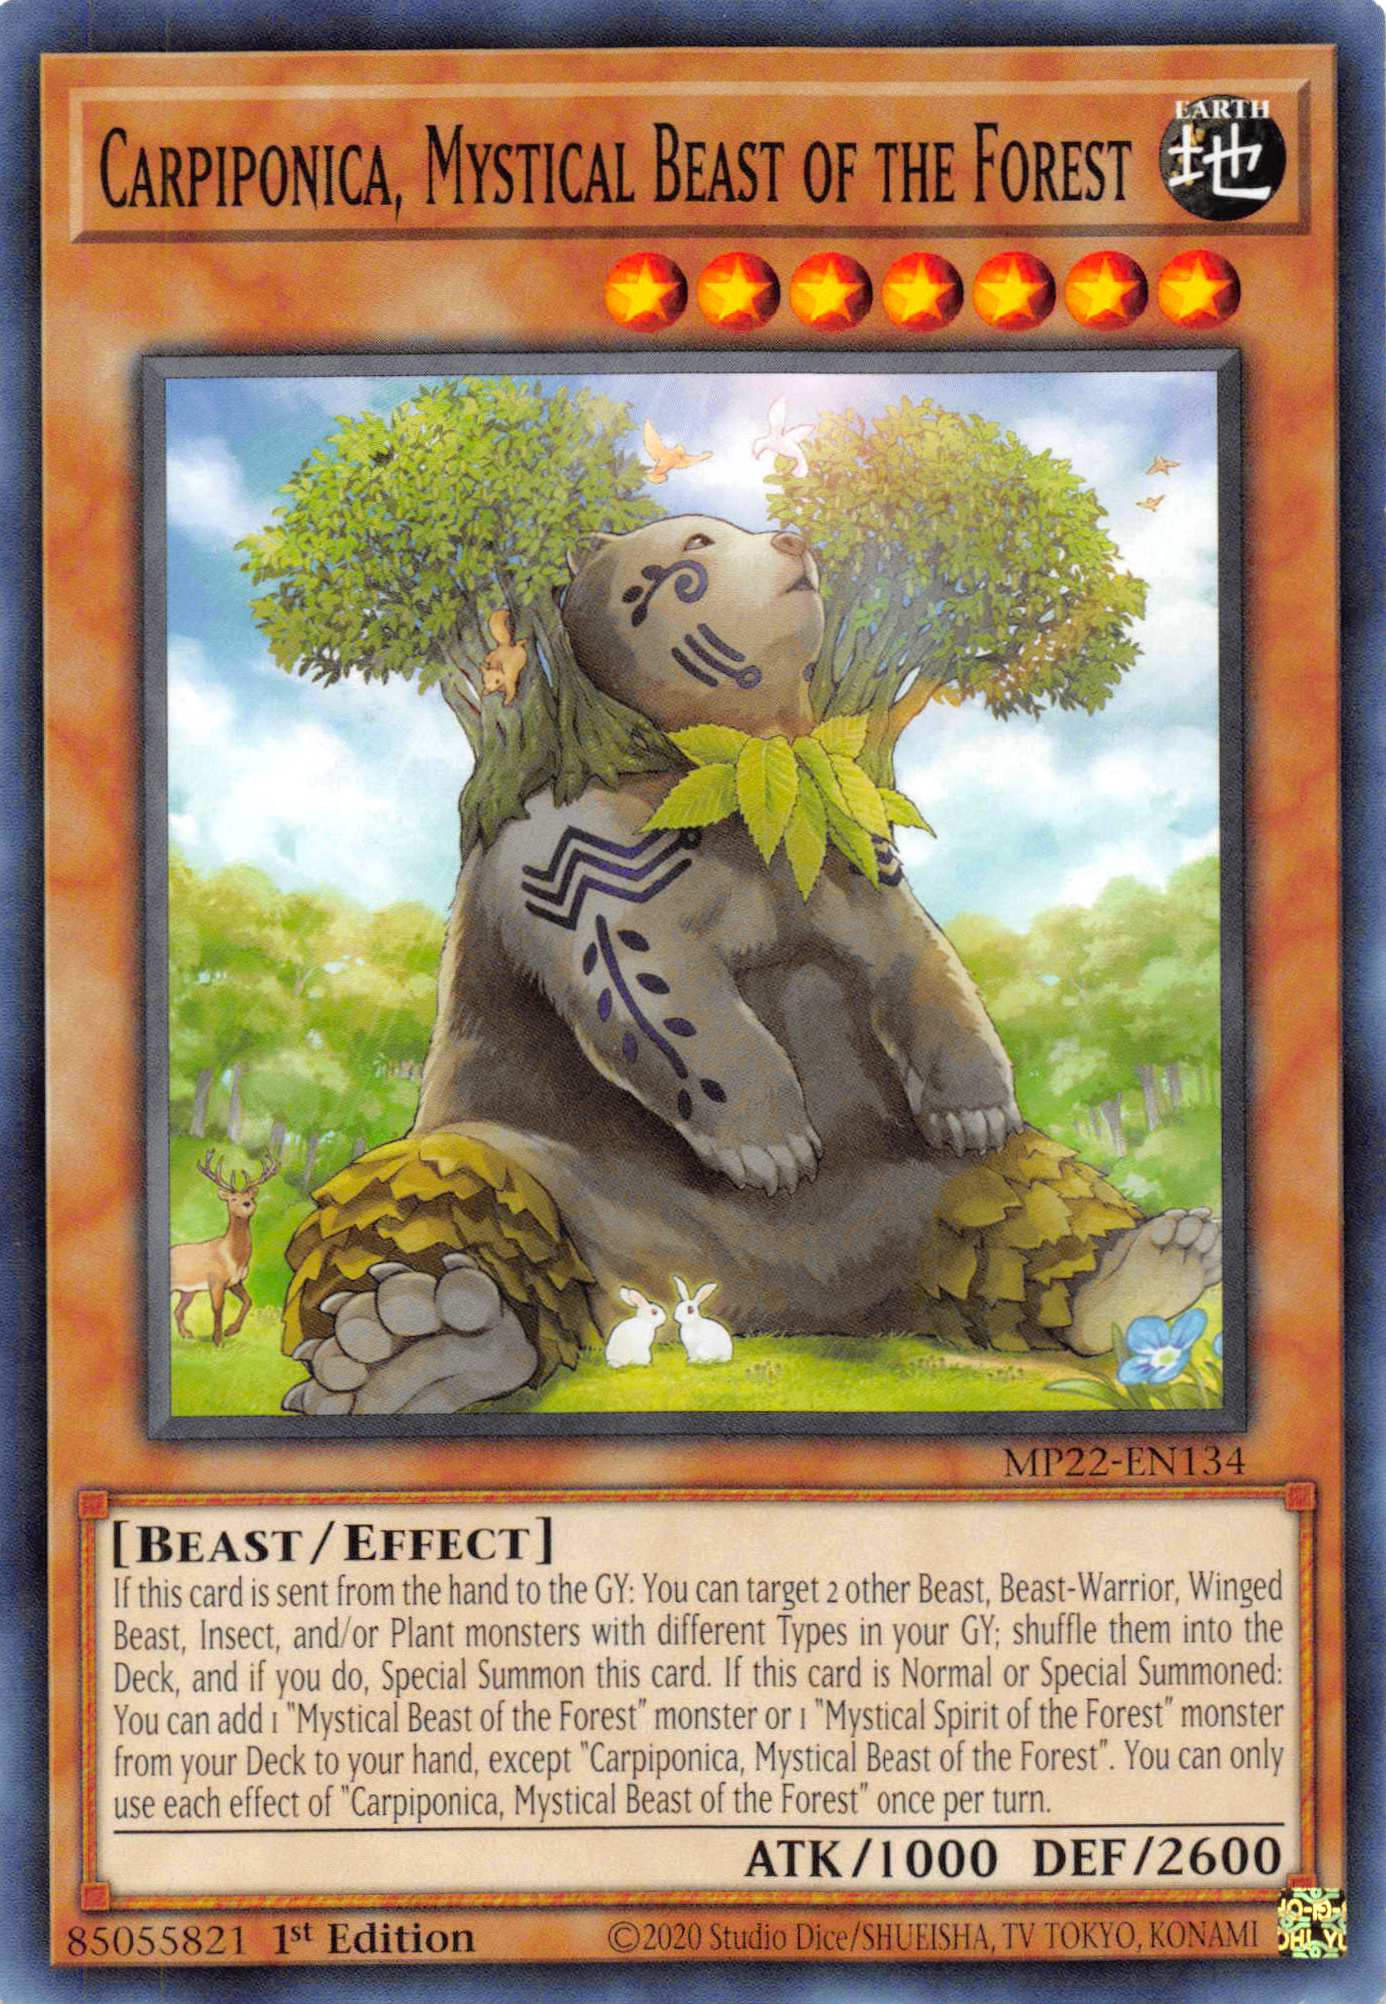 Carpiponica, Mystical Beast of the Forest [MP22-EN134] Common